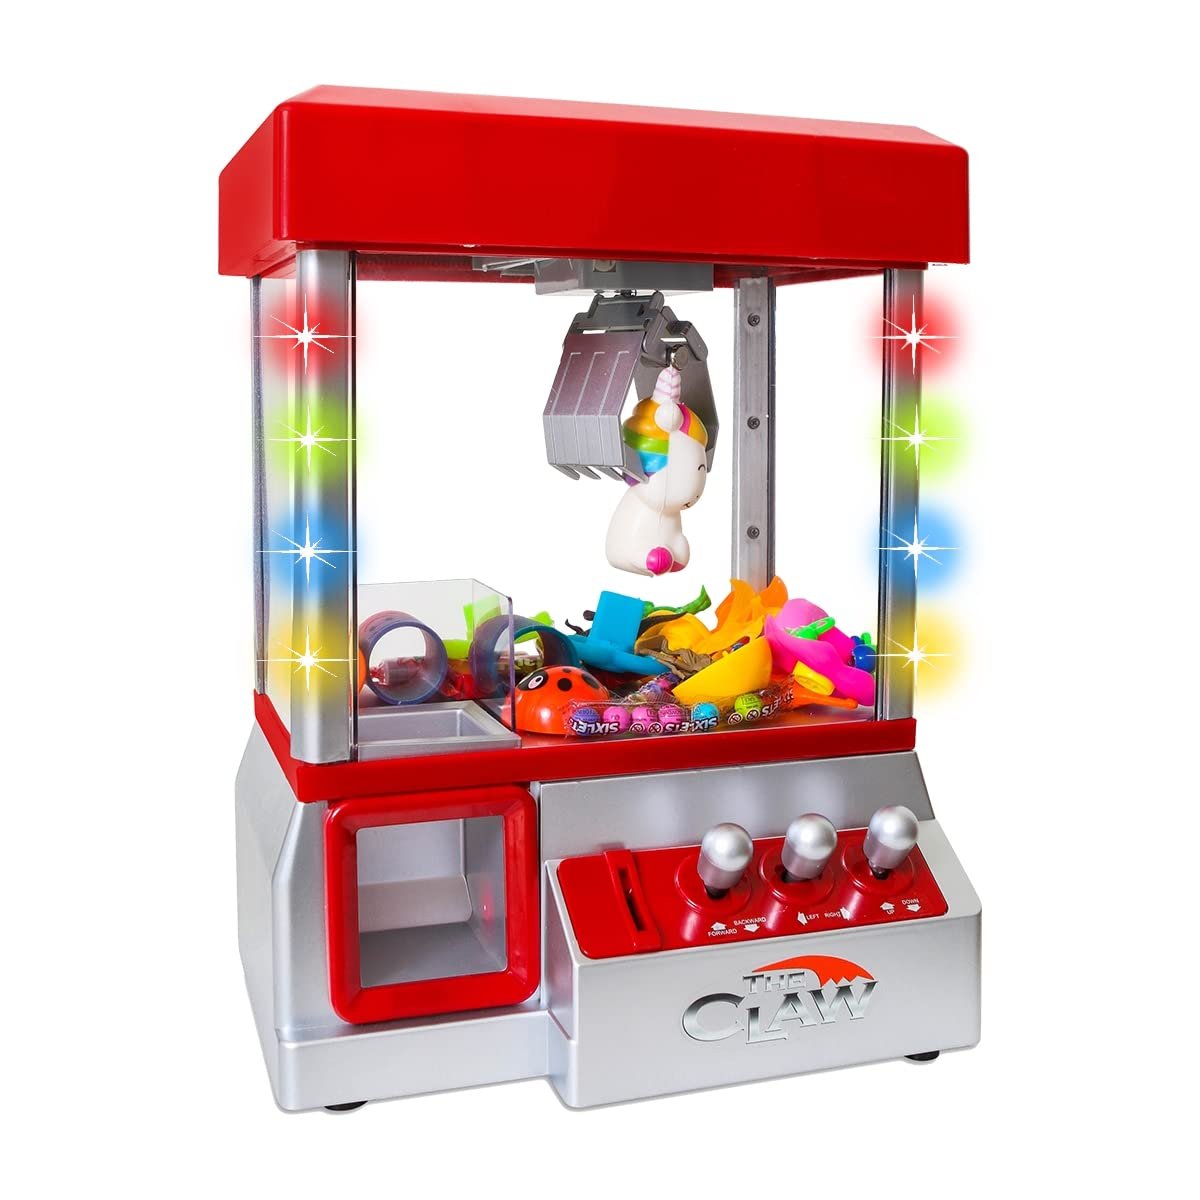 Bundaloo Claw Machine Arcade Game with Sound, Cool Fun Mini Candy Grabber Prize Dispenser Vending Toy for Kids, Boys & Girls (The Original Claw W/Lights)